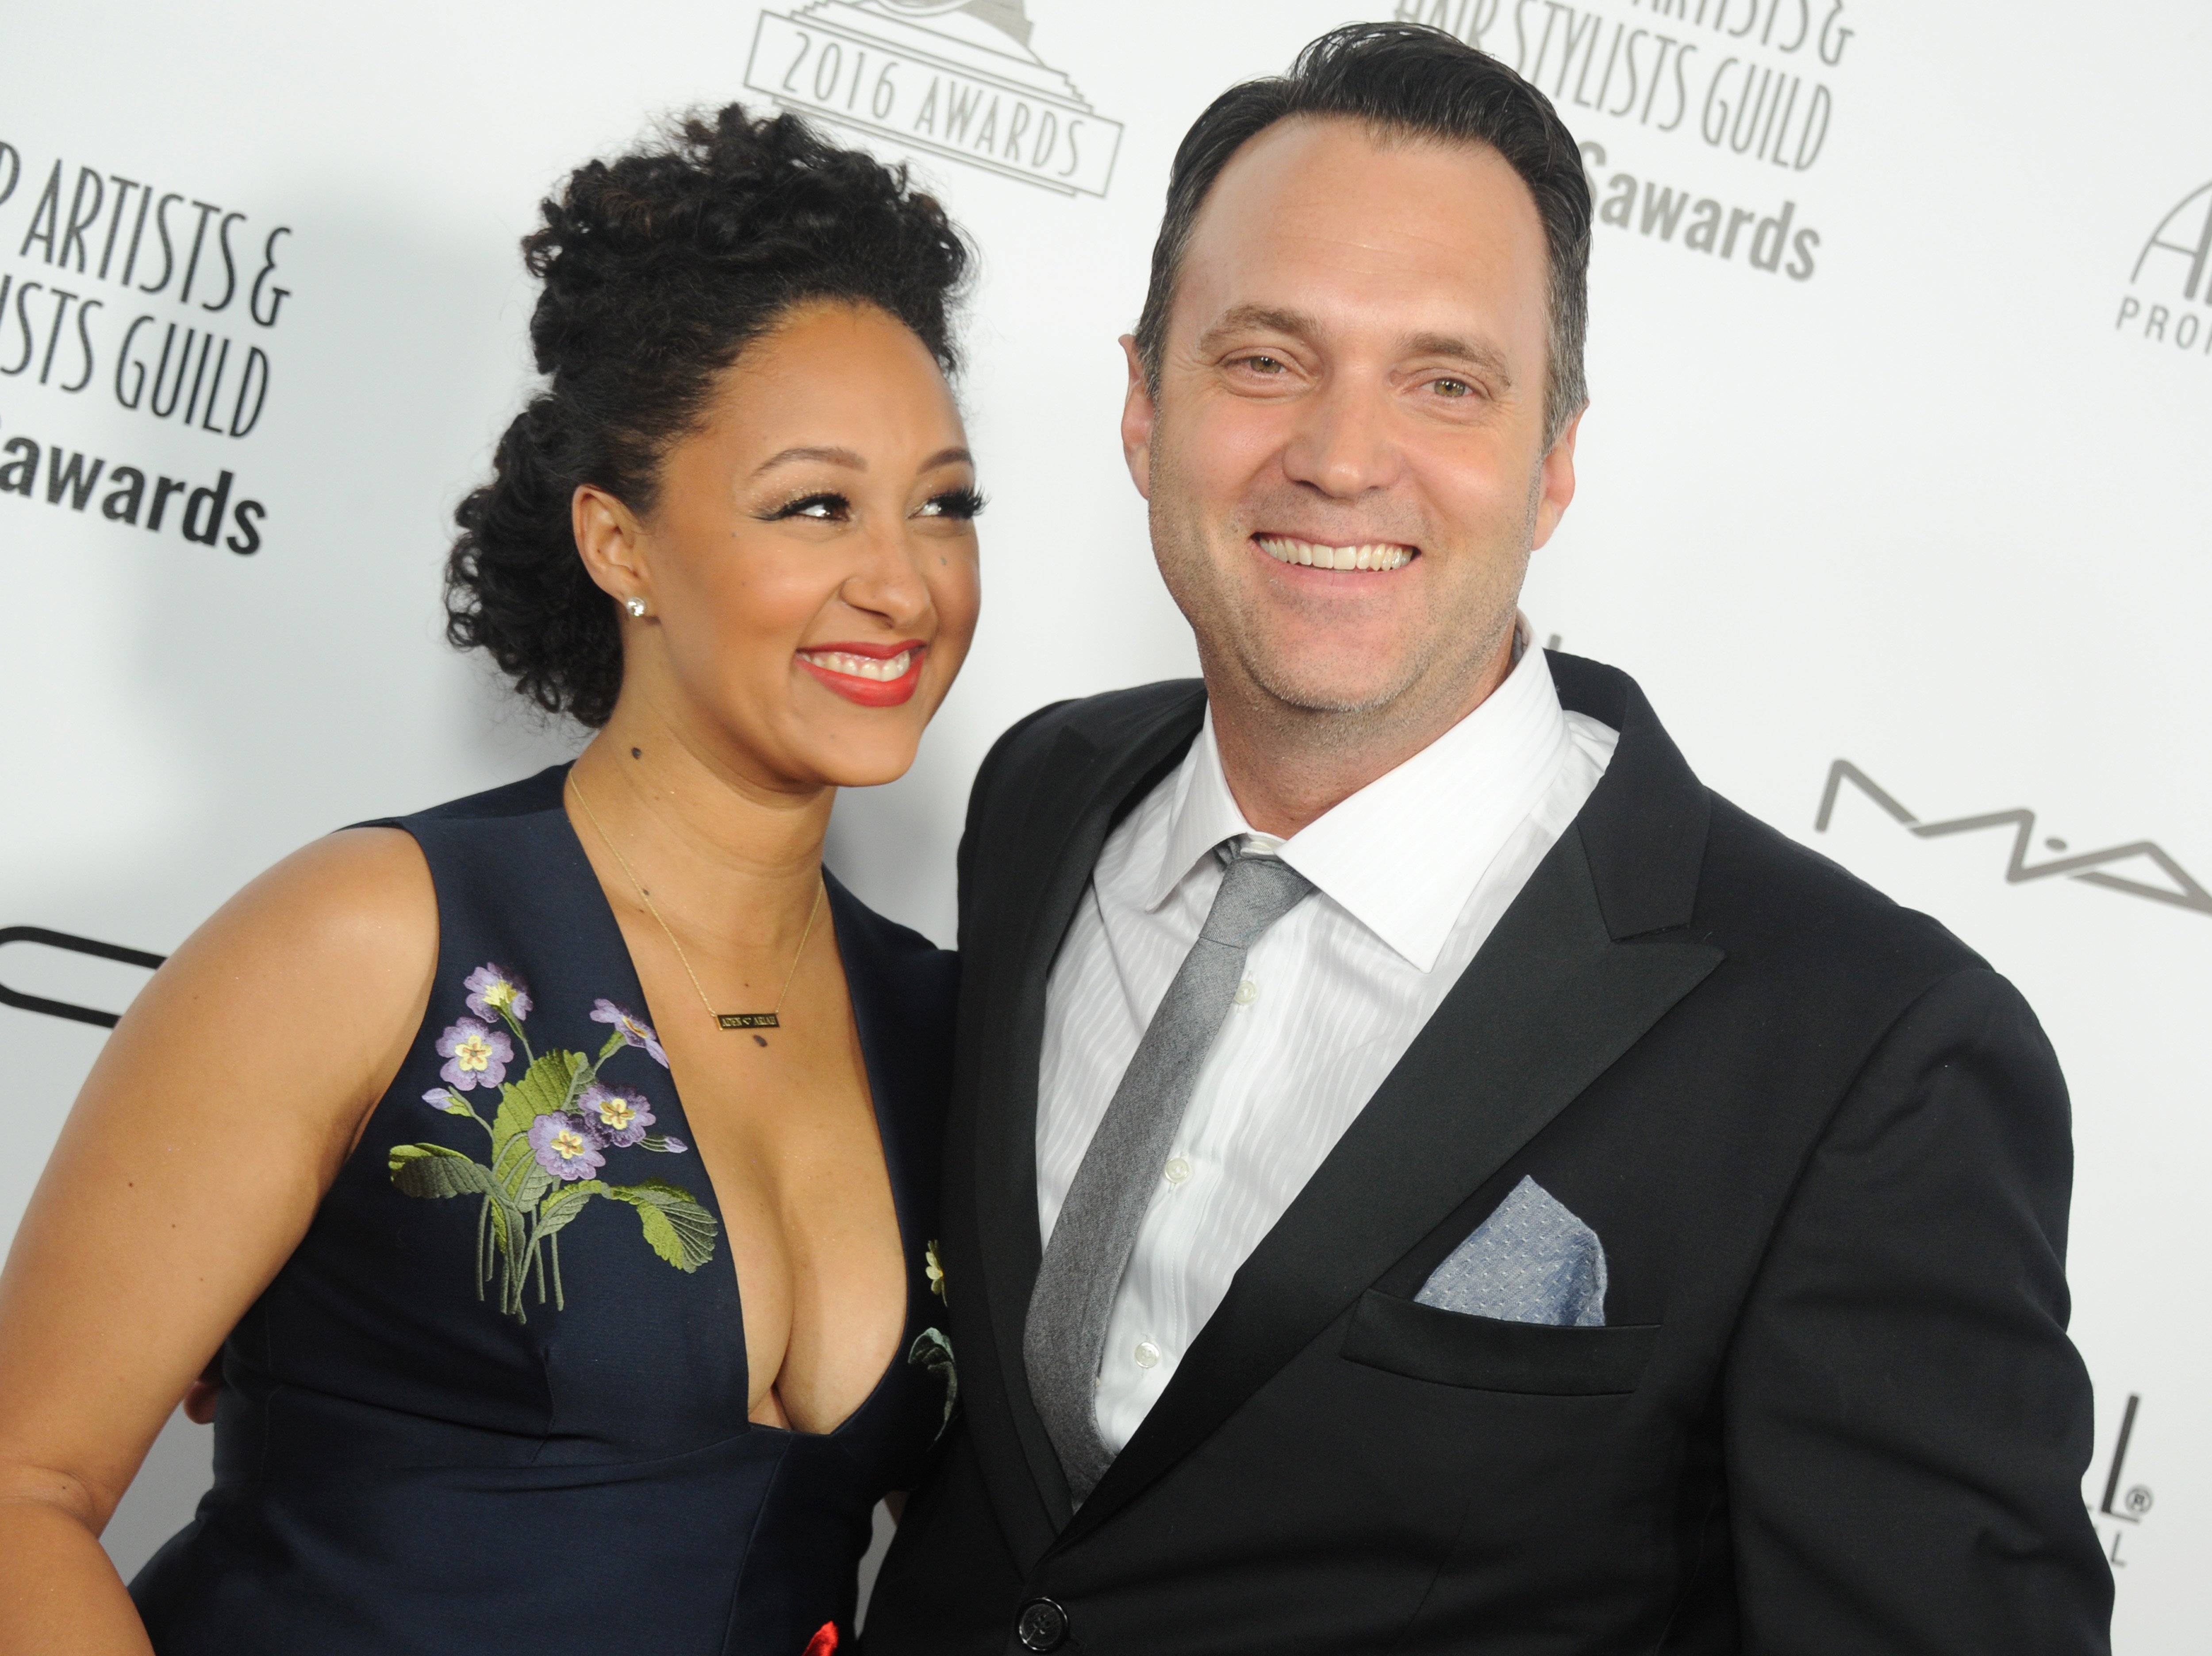 Tamera Mowry-Housley and Adam Housley at the Make-Up Artists And Hair Stylists Guild Awards on Febr. 20, 2016 in Hollywood, California. |Photo: Getty Images